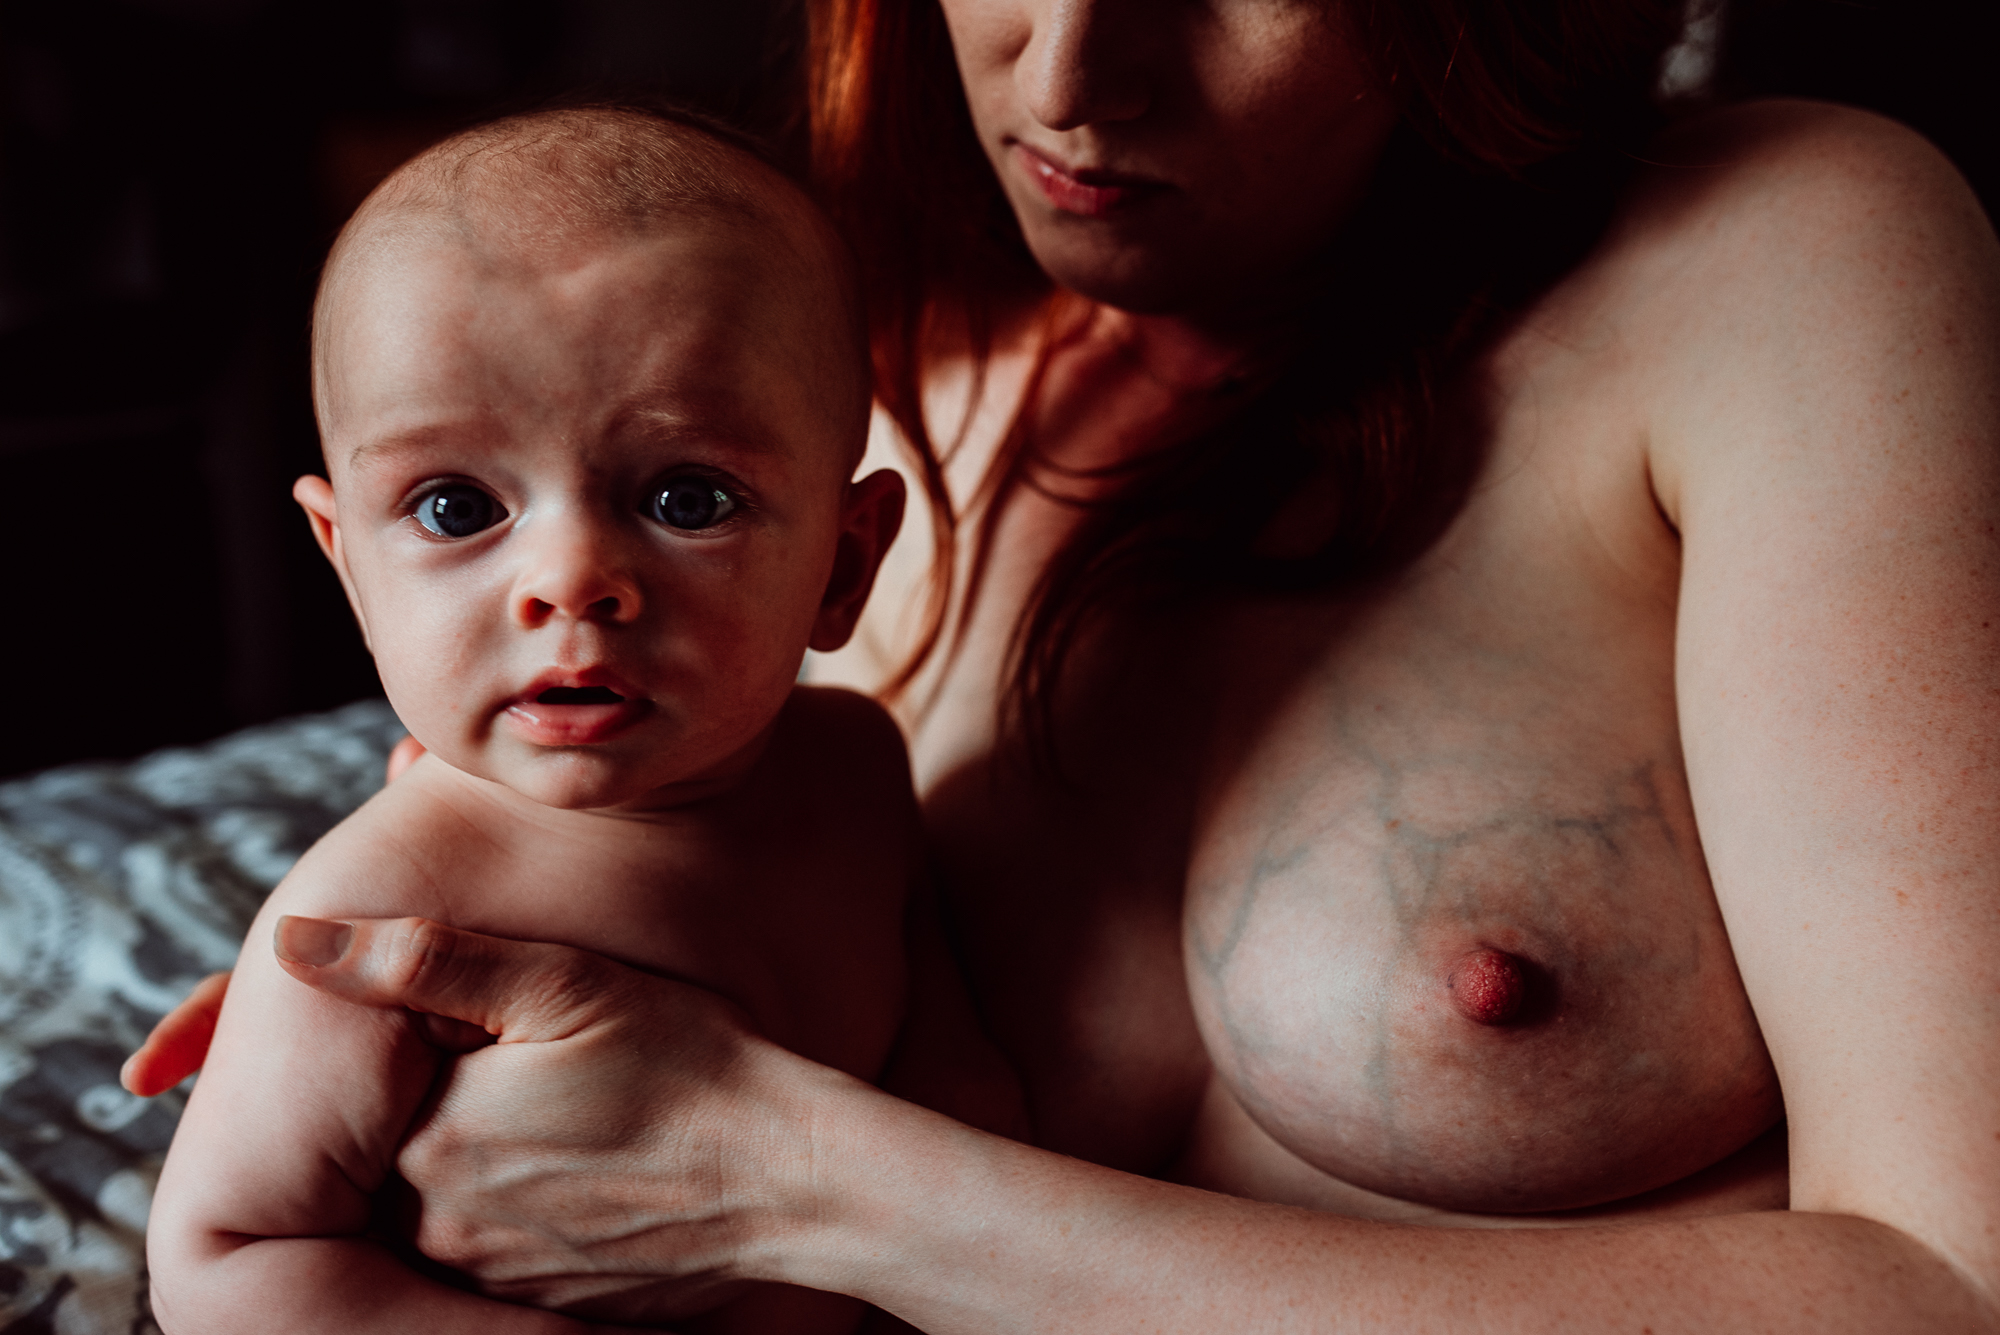 Minneapolis Postpartum Photography by Meredith Westin-May 14, 2019-125219.jpg